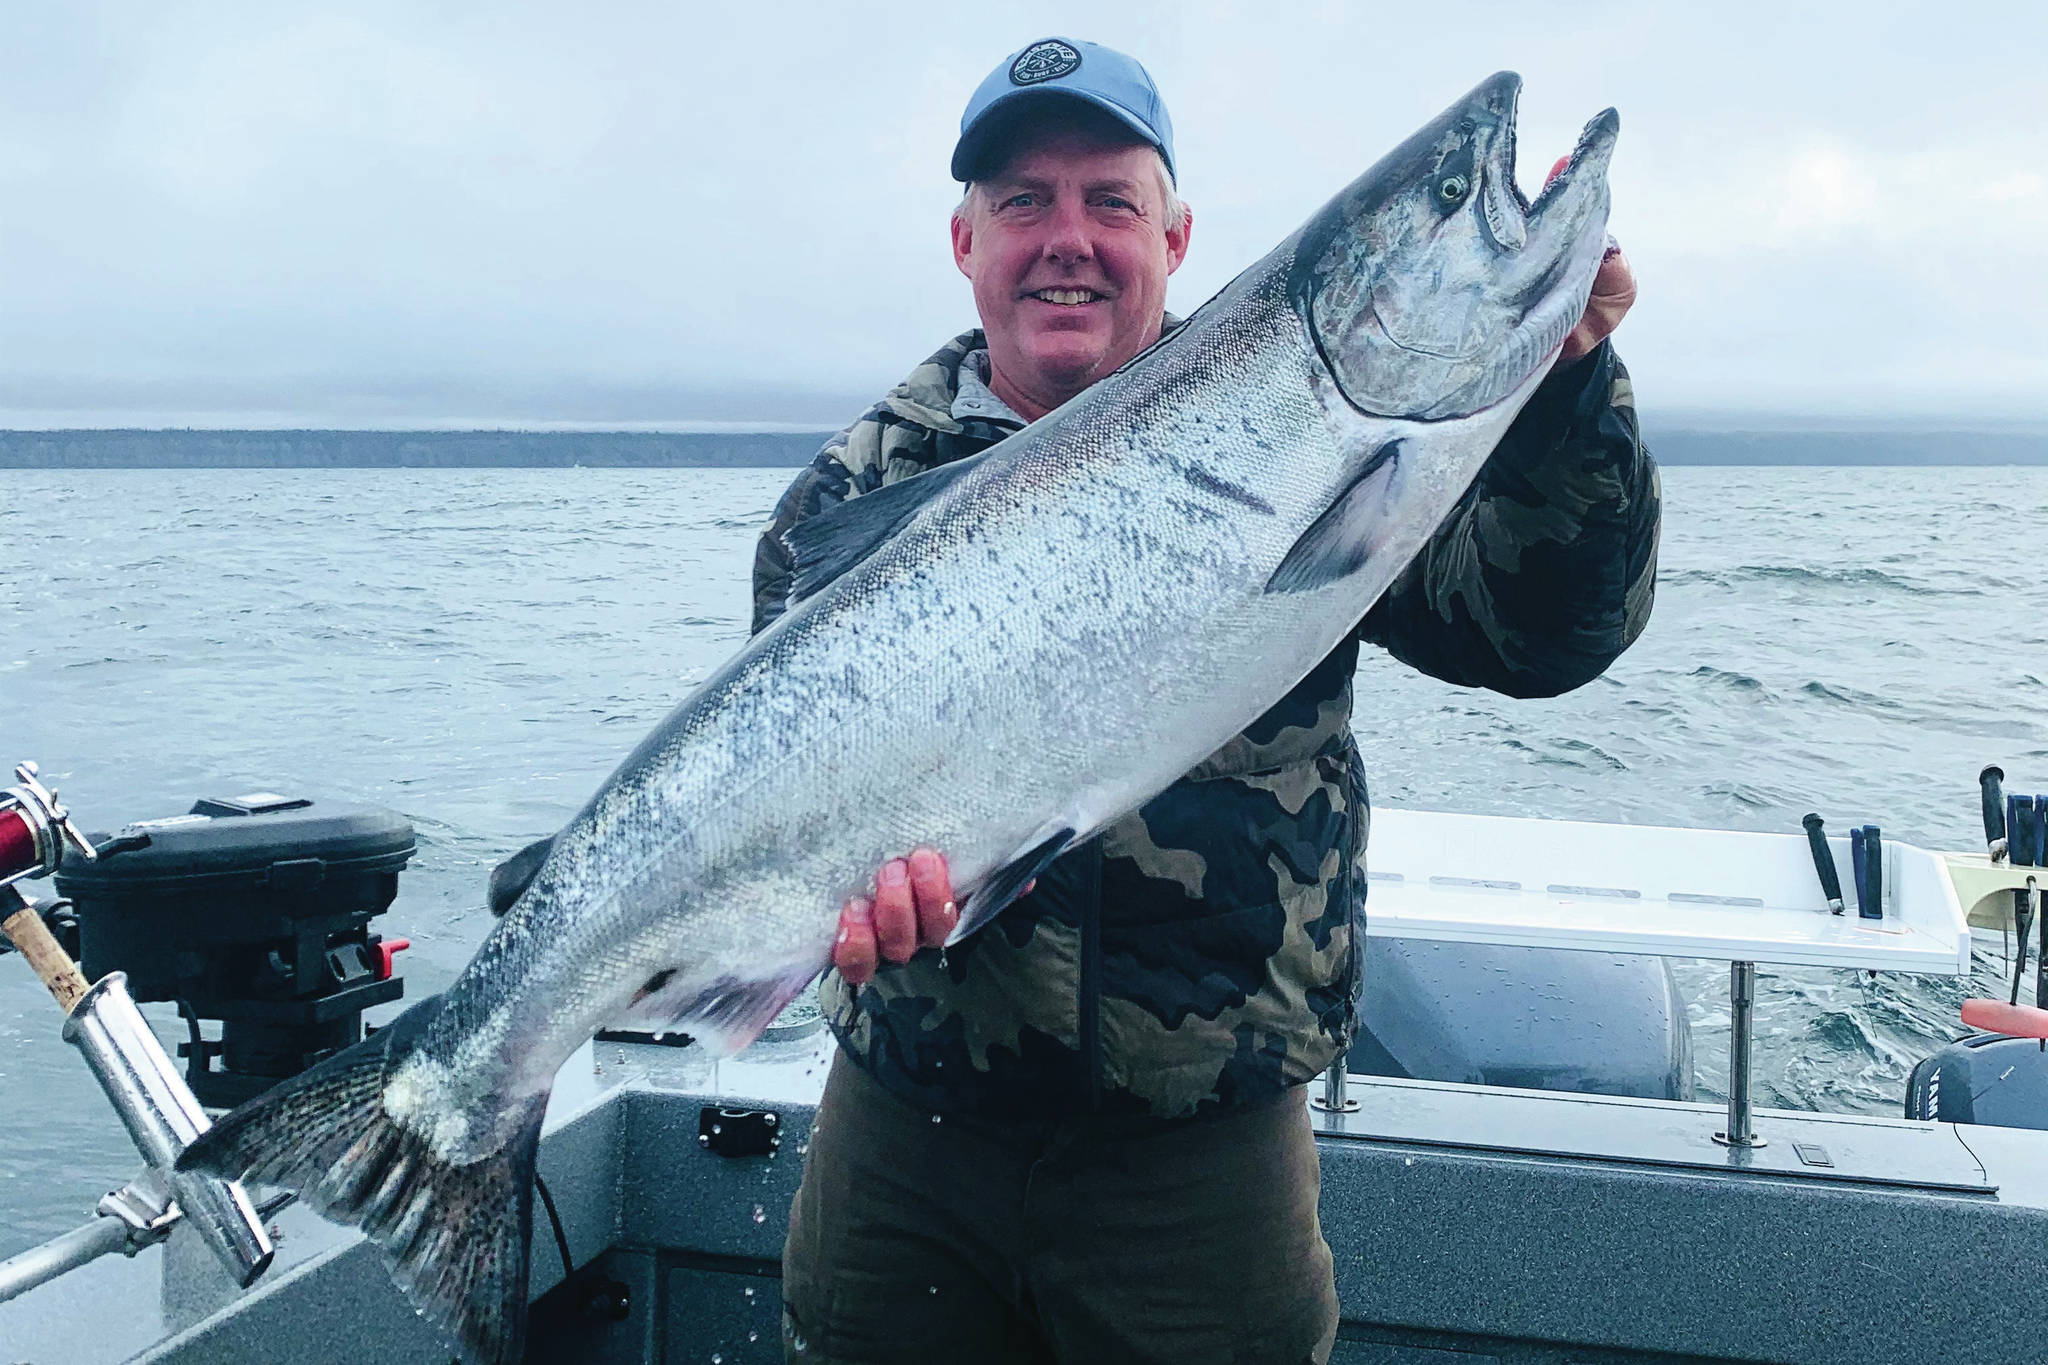 The 26th annual Anchor Point King Salmon Derby and Calutta first place fish was caught by Todd Jacobson on the Hurt Locker with a 26.65 pound catch. The derby had 76 anglers participate, and more than 30 fish weighed in. Photo provided by the Anchor Point Chamber of Commerce